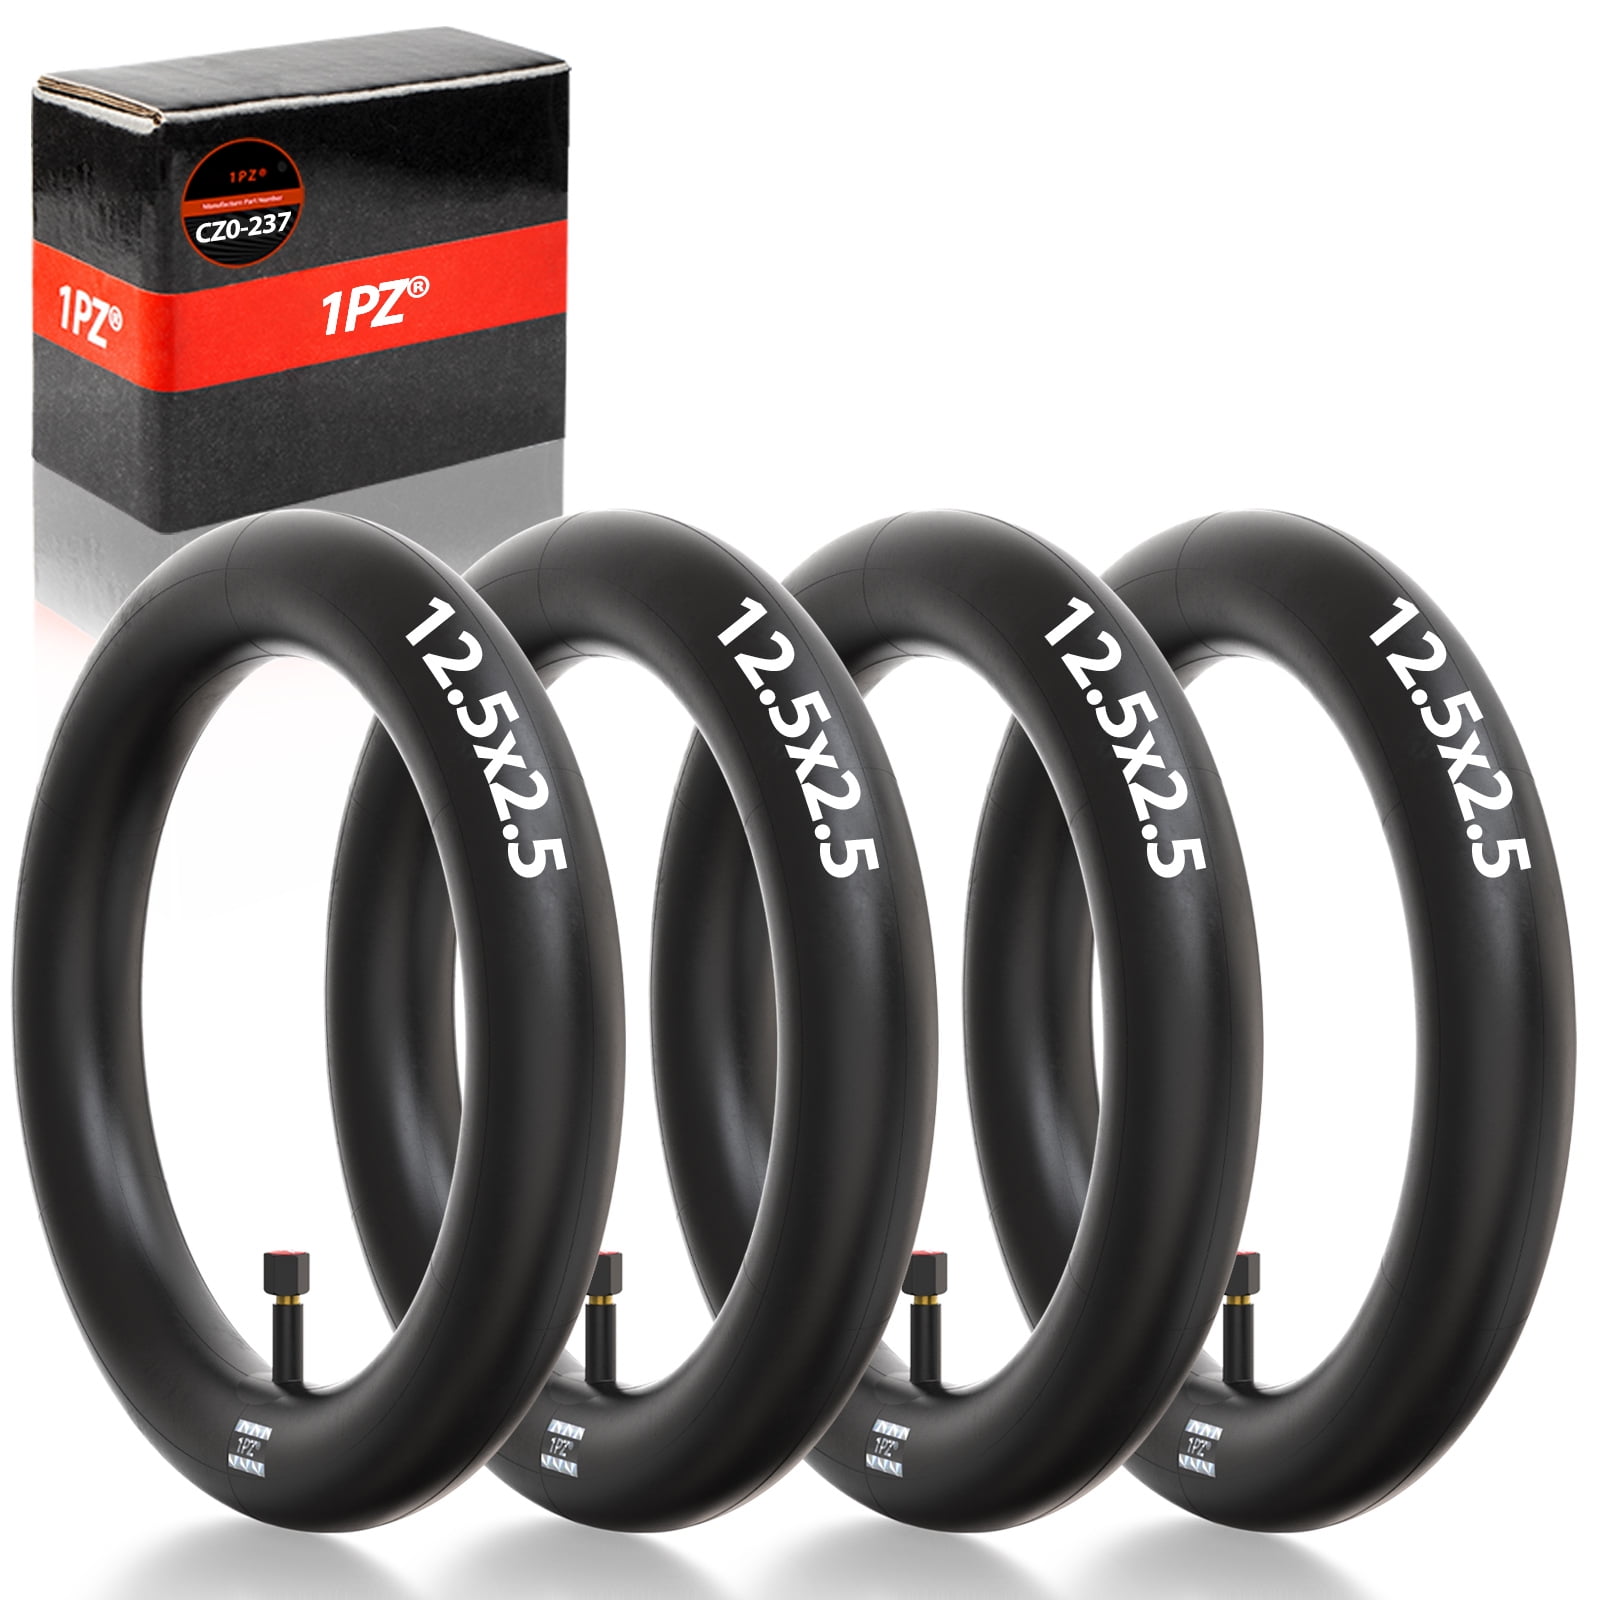  2.75-10 Scooter Tire, 2.75-10 Tubeless Tire 14 x 2.75 Tire